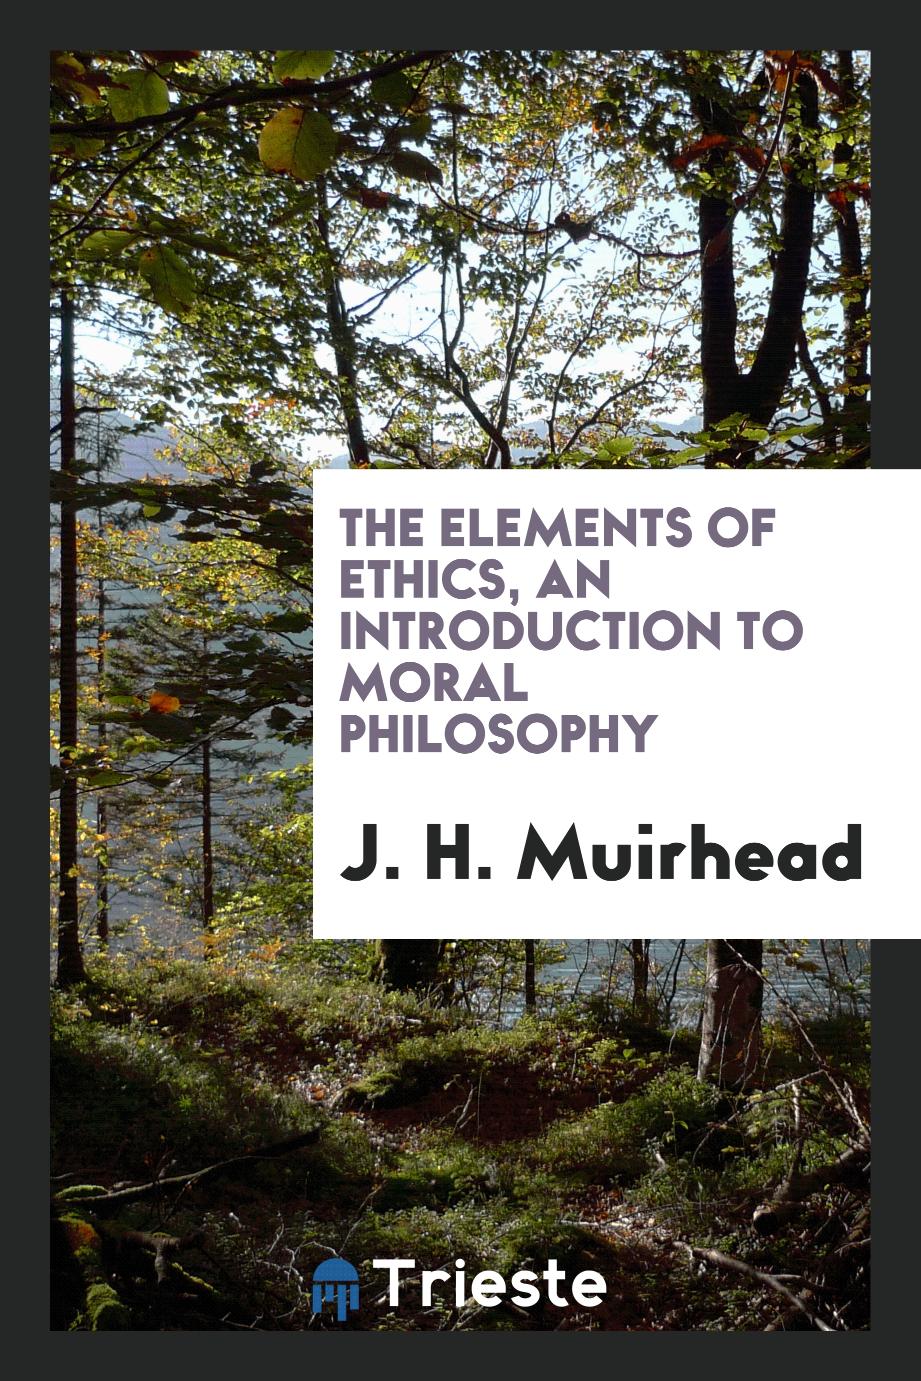 The elements of ethics, an introduction to moral philosophy